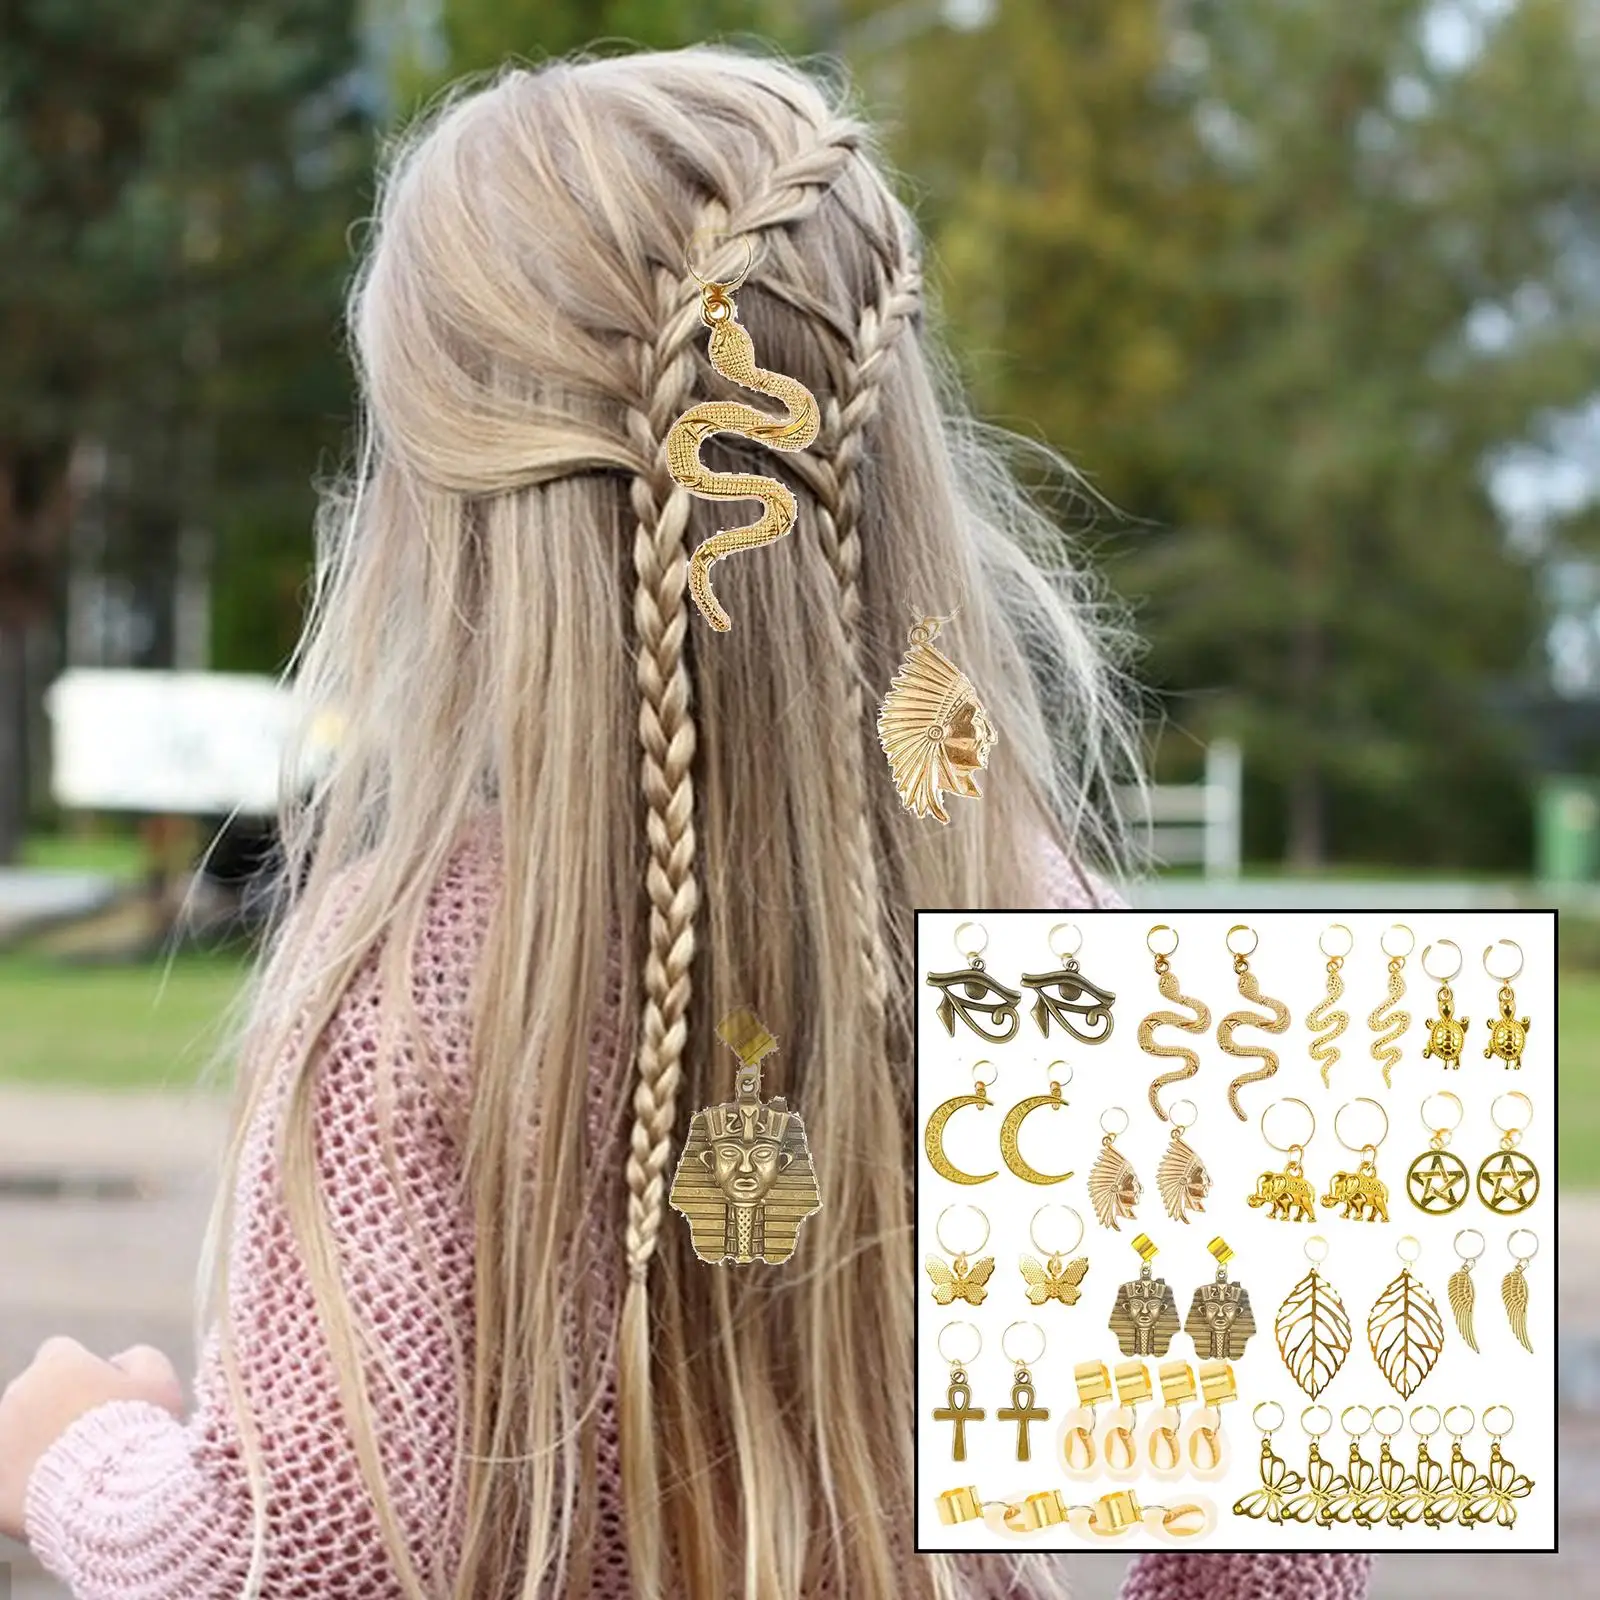 40Pcs Jewelry Braids Hair Clips Dreadlocks Hair Cuffs for Dating, Working, Travelling Hair Beads Stretchable Hair Rings Reusable